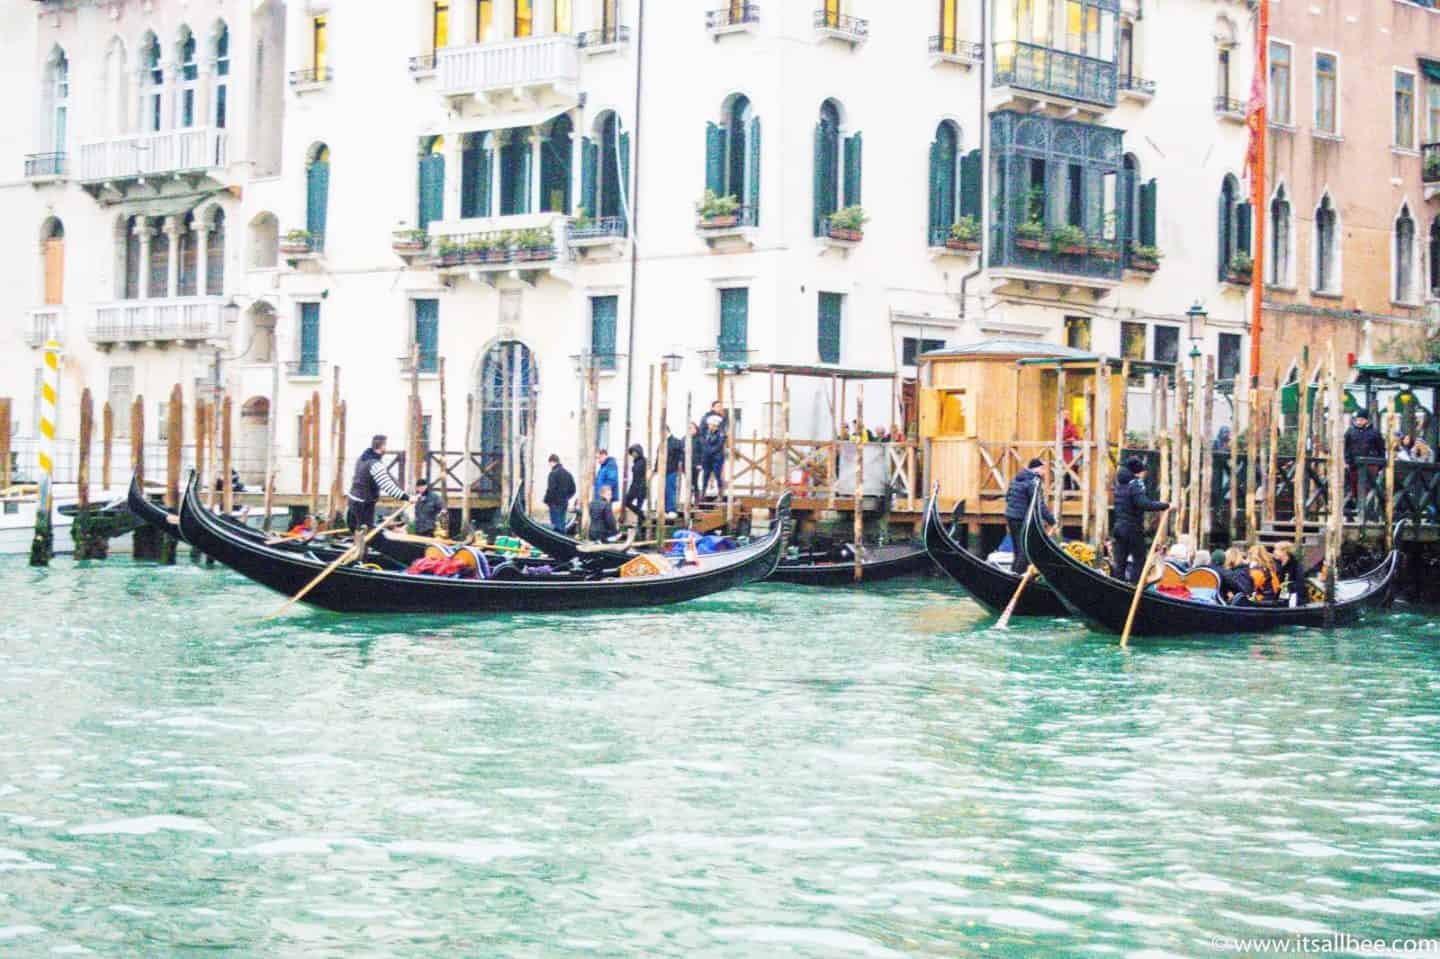 taxis in venice italy | travel from venice airport to city centre | getting from venice to murano | travel from venice airport | how much is a water taxi in venice | best way to travel from venice airport to hotel | taxi in venice | venice airport to city center | venice taxi